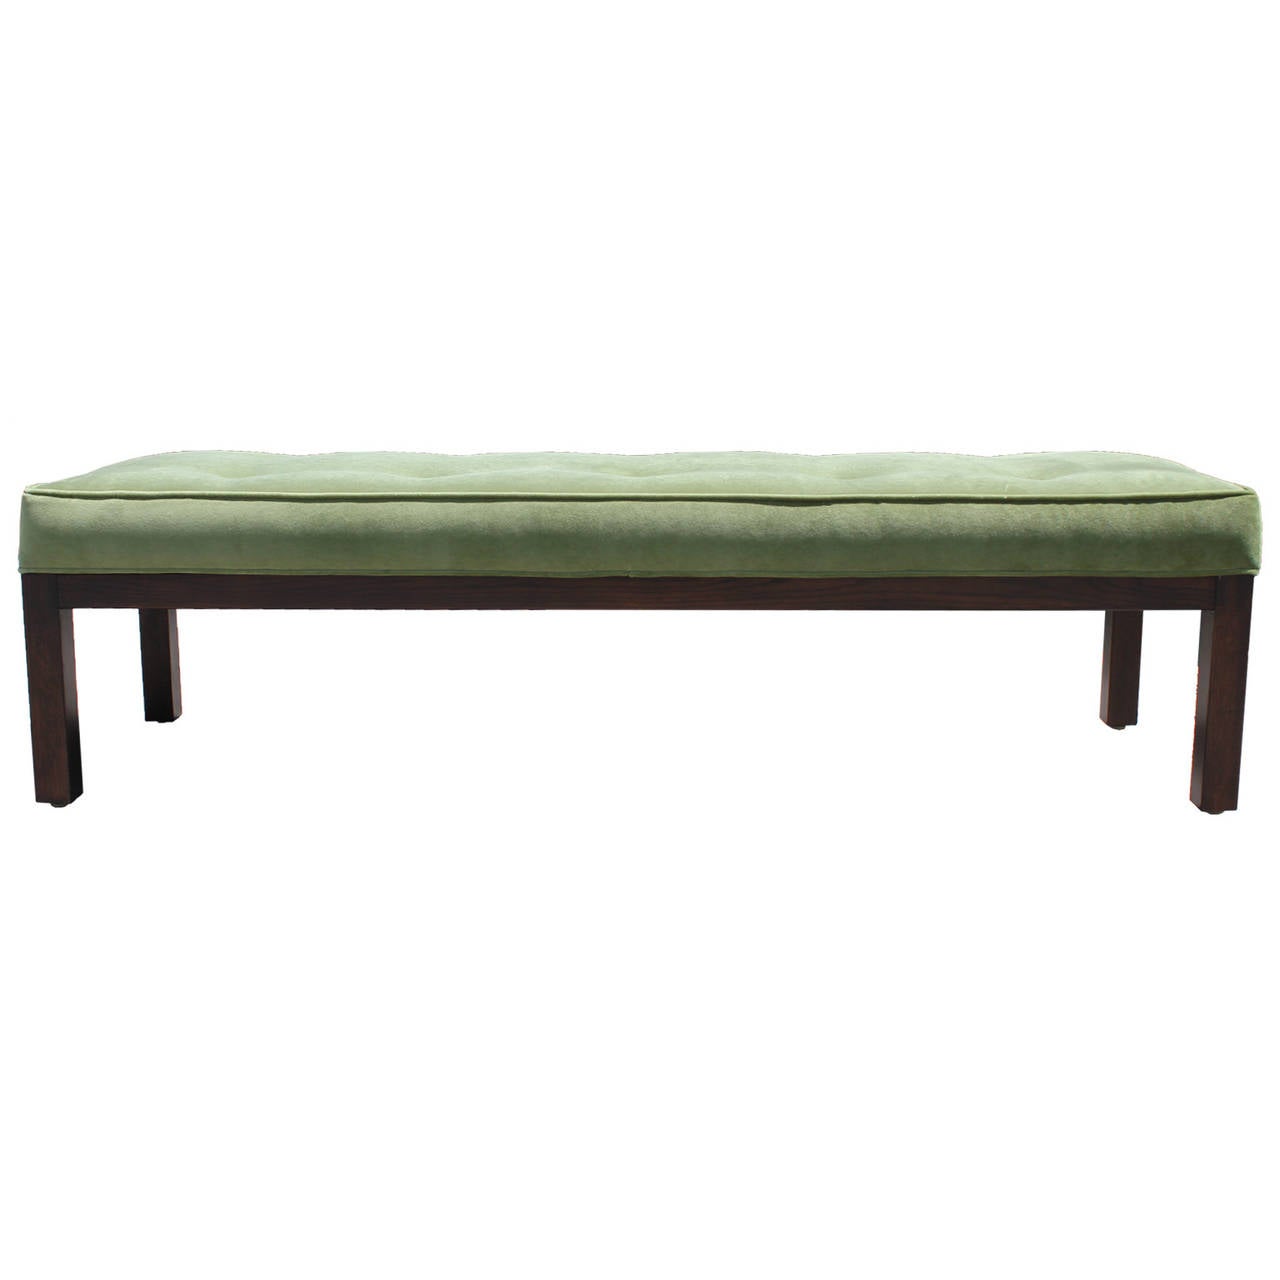 Wonderful Parsons style bench. Base is stained a dark walnut. Cushion is upholstered in luxe green velvet with tufting and piping. Perfect at the end of a bed.